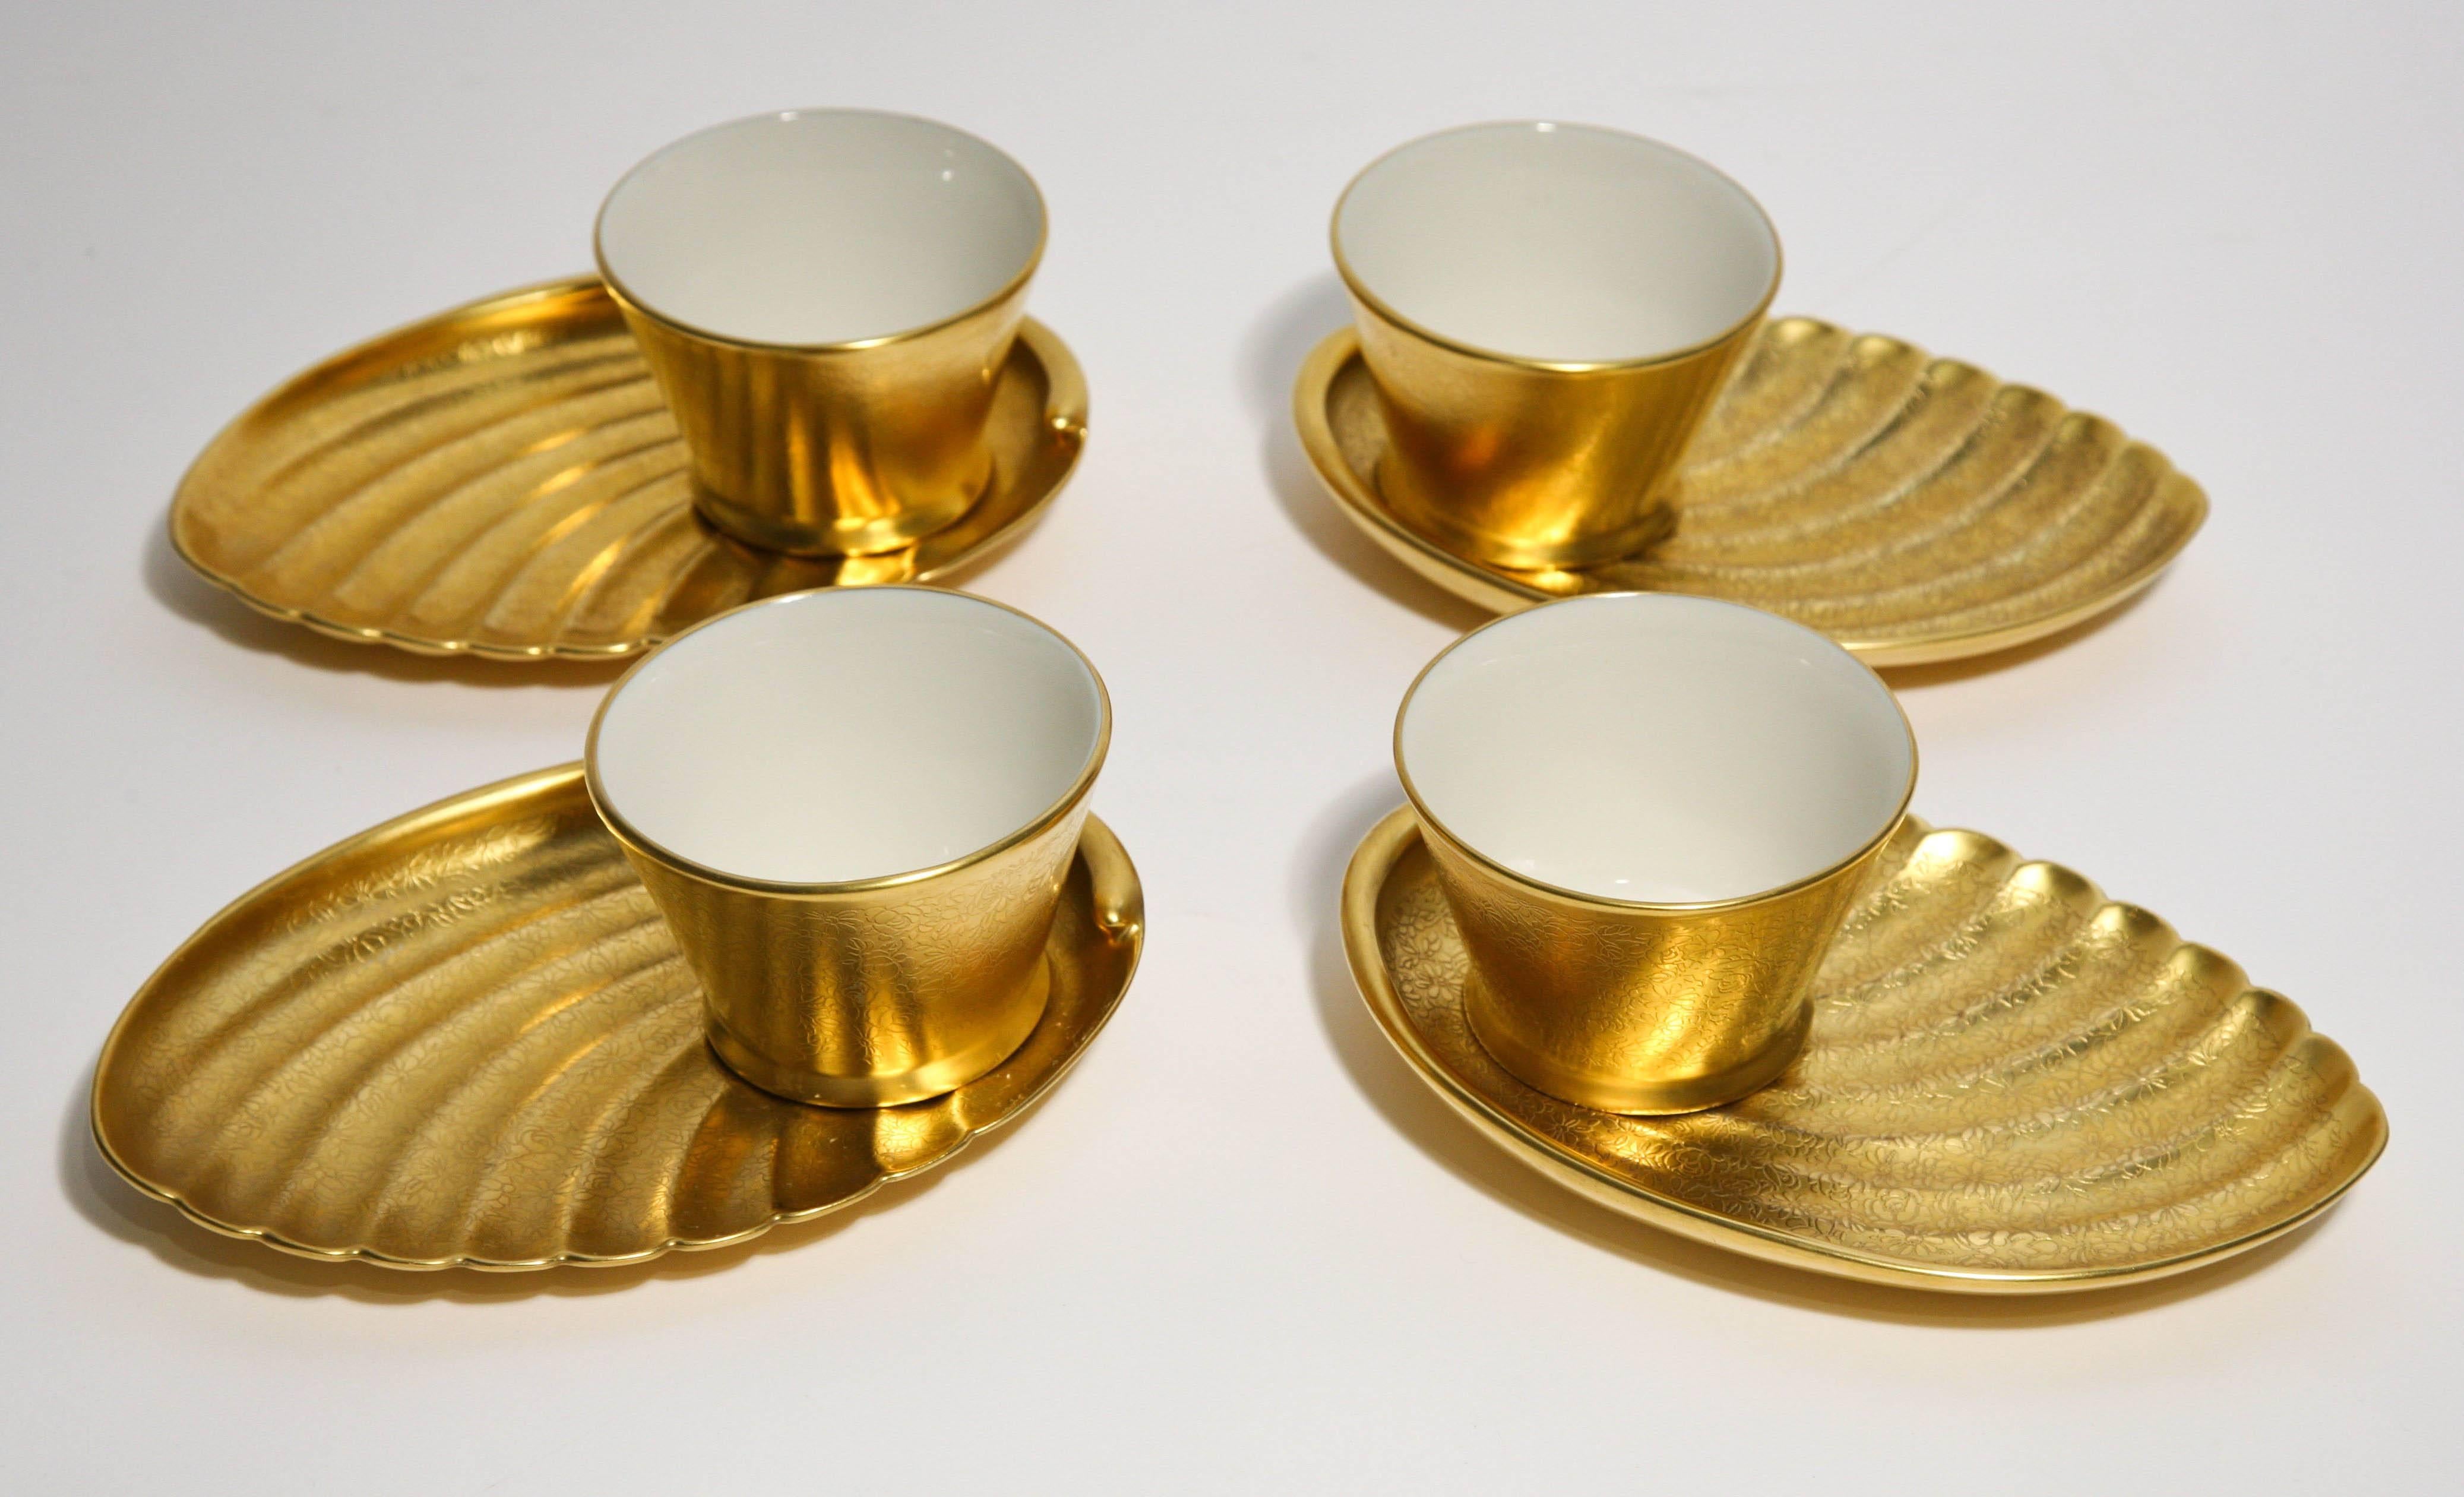 A wonderful vintage set by America's leading porcelain manufacturer Pickard featuring their all-over gilt acid etched pattern on fine porcelain. This versatile set would be perfect for chowder, soup and sandwich or used separately as side plate and